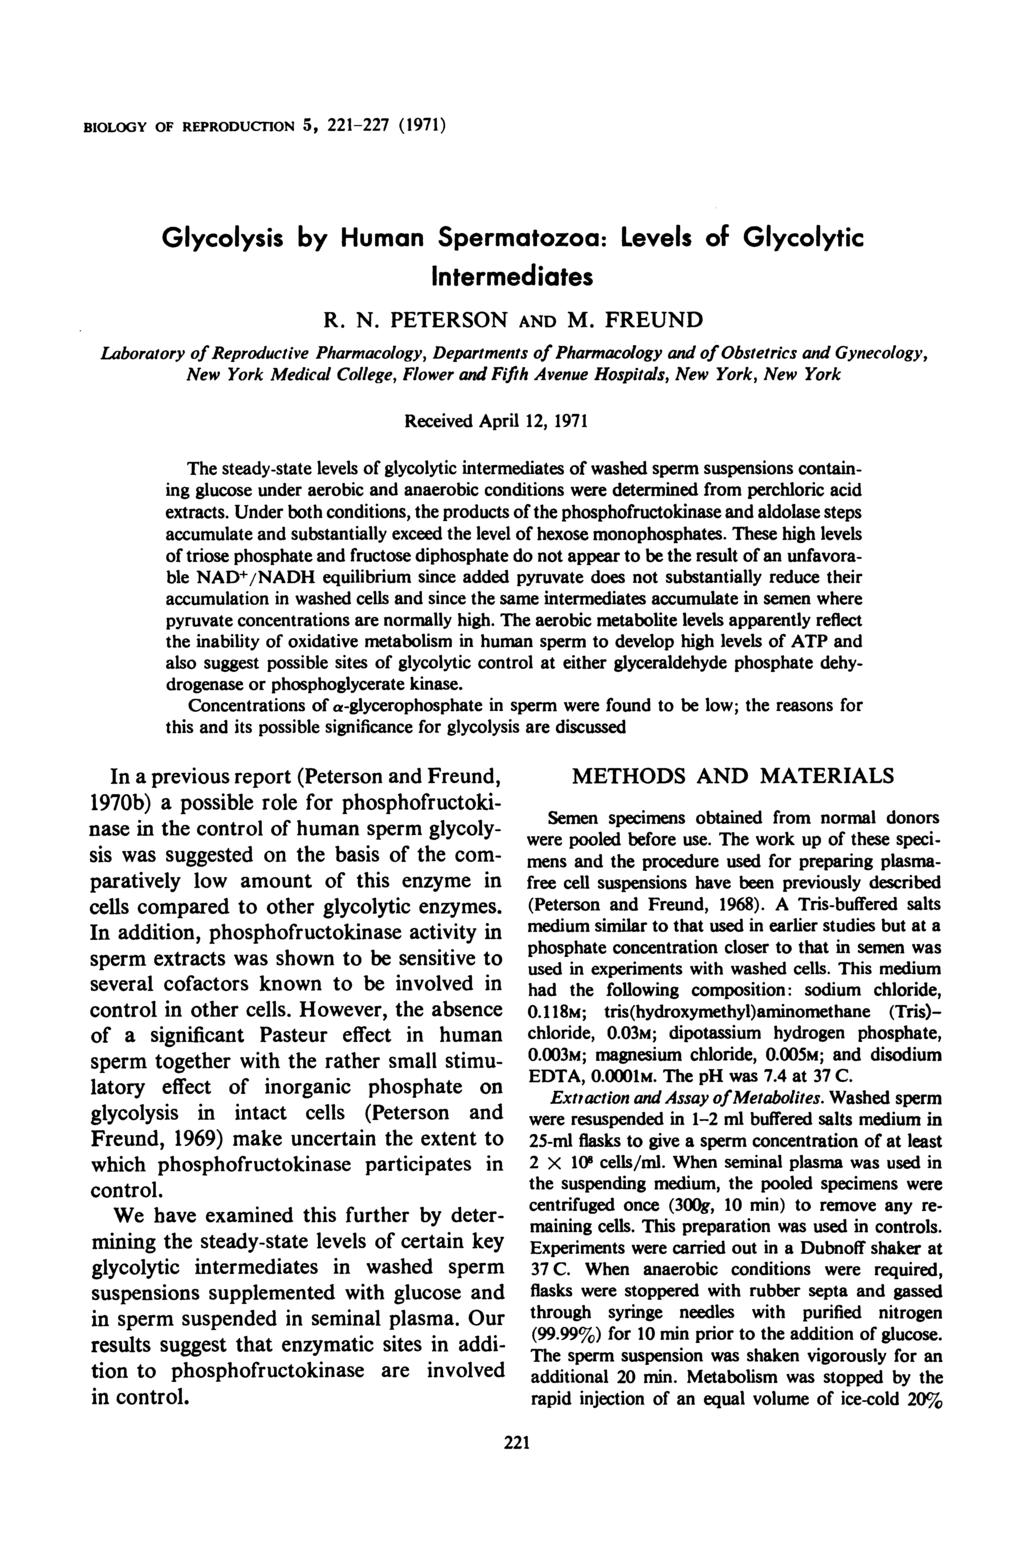 BIOLOGY OF REPRODUCrION 5, 221-227 (1971) Glycolysis by Human Spermatozoa: Levels of Glycolytic Intermediates R. N. PETERSON AND M.